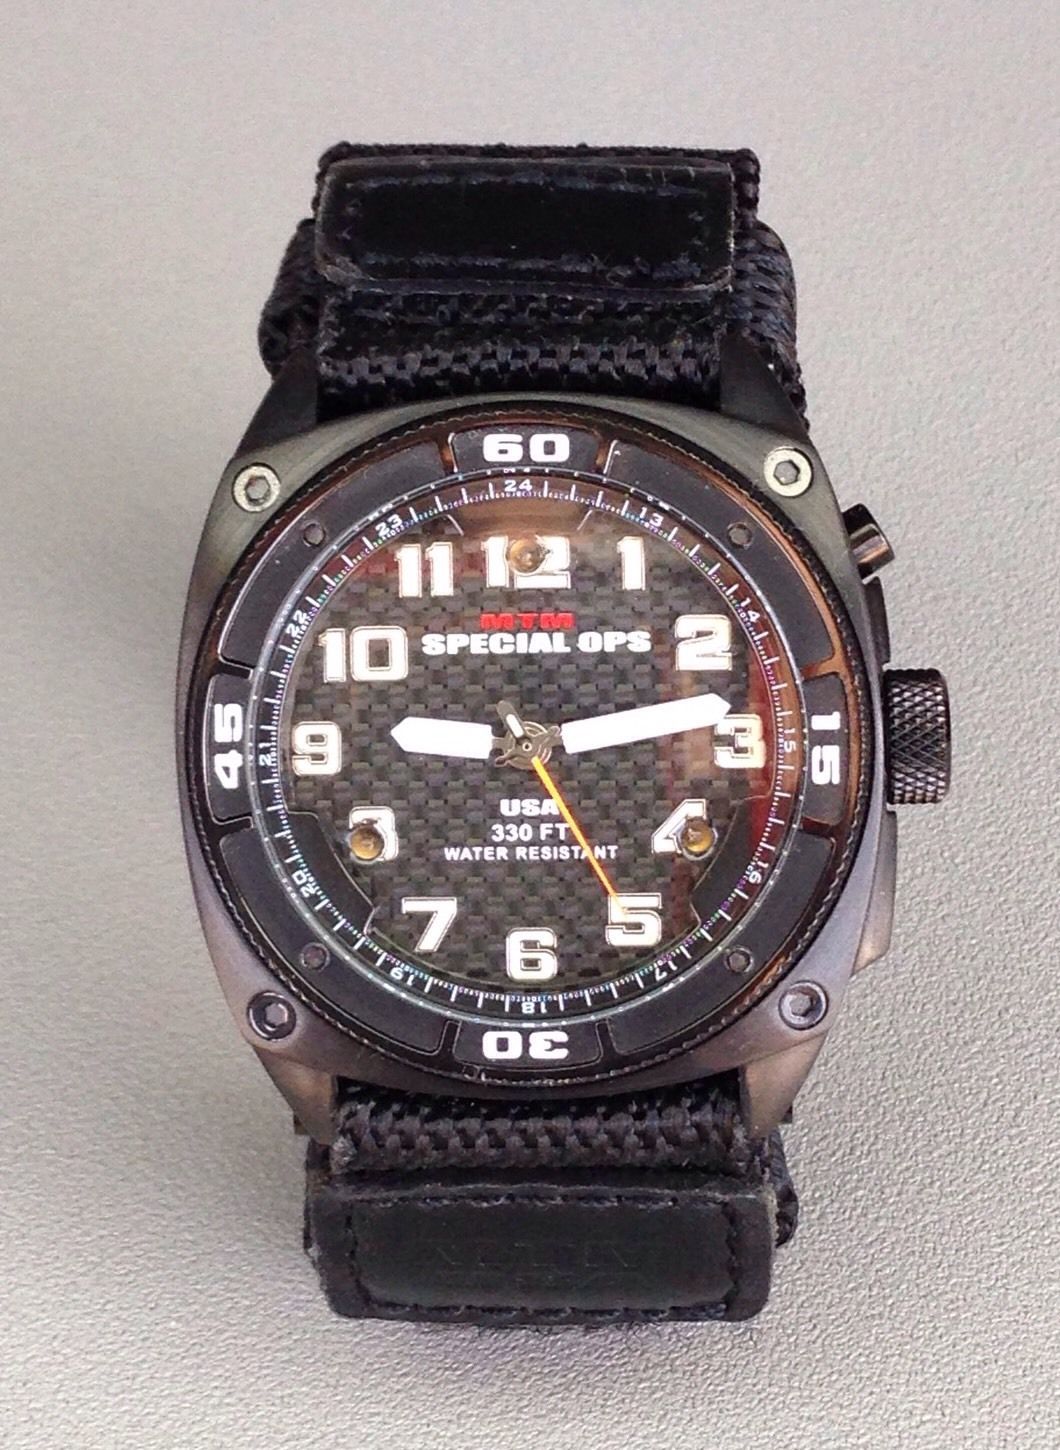 BLACKHAWK Deep Sea Operator Watch with Stainless Case : Amazon.ca:  Clothing, Shoes & Accessories